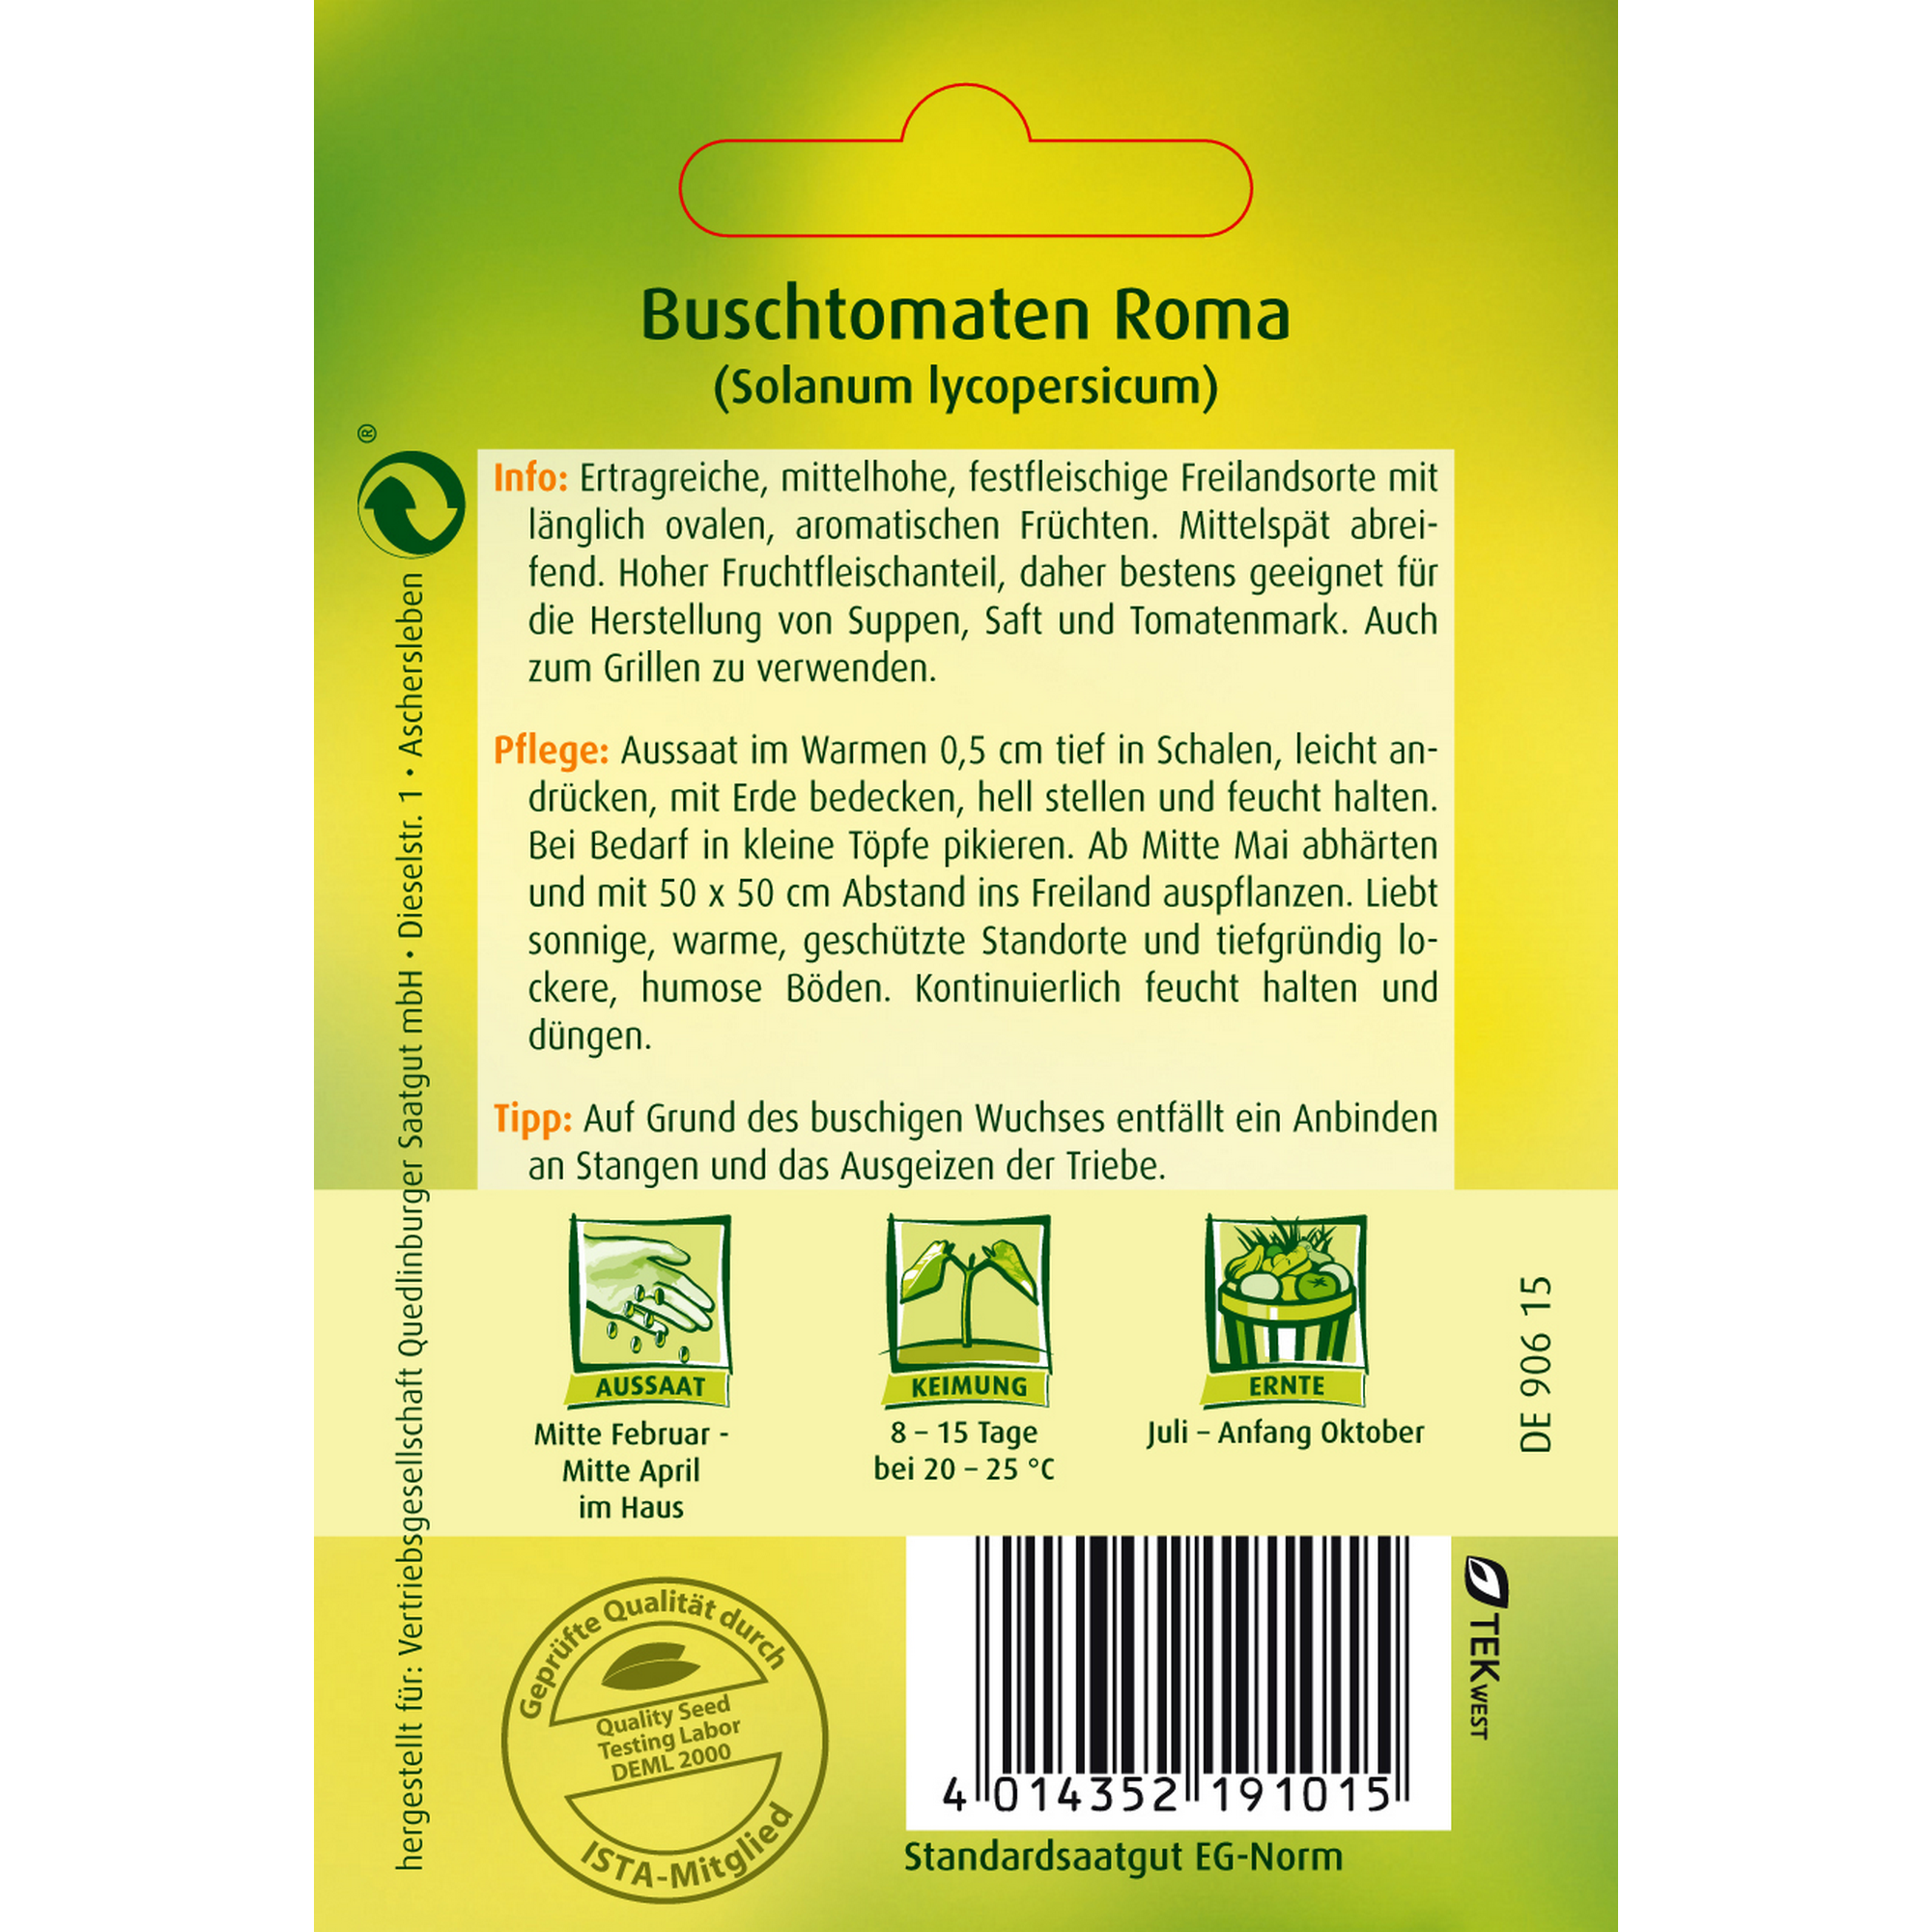 Buschtomate 'Roma' + product picture